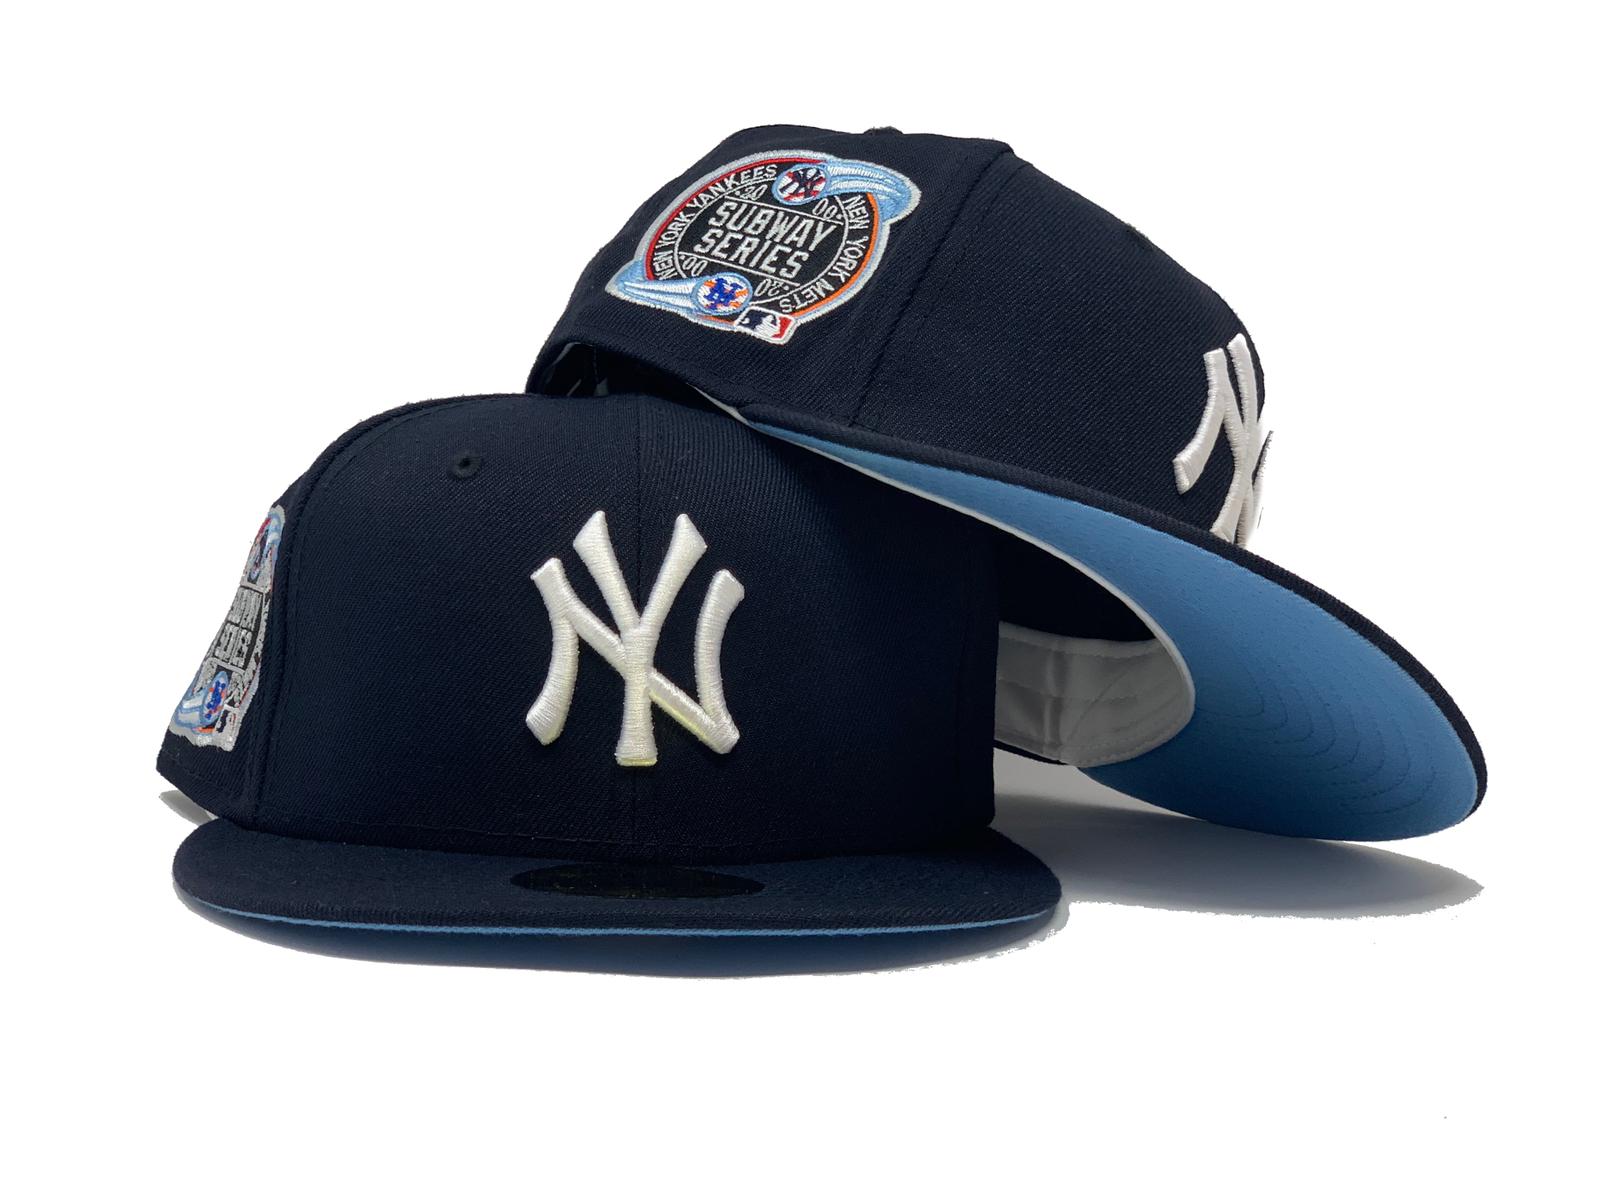 New York Yankees Subway Series New Era 59FIFTY Fitted Hats (Navy Gray Under BRIM) 8